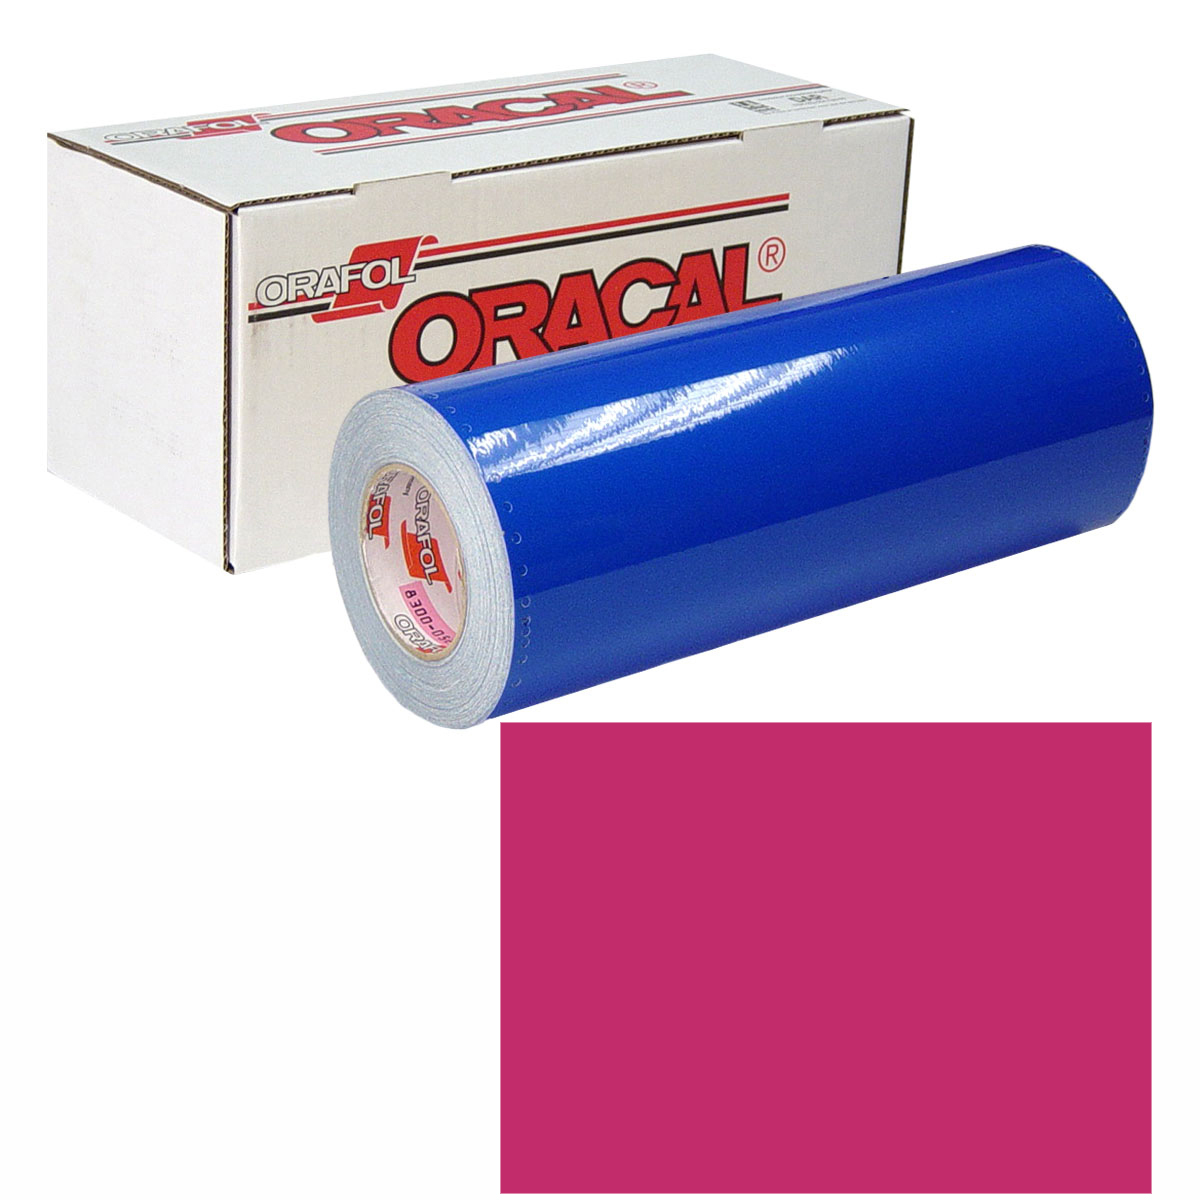 ORACAL 631 30in X 50yd 041 Pink